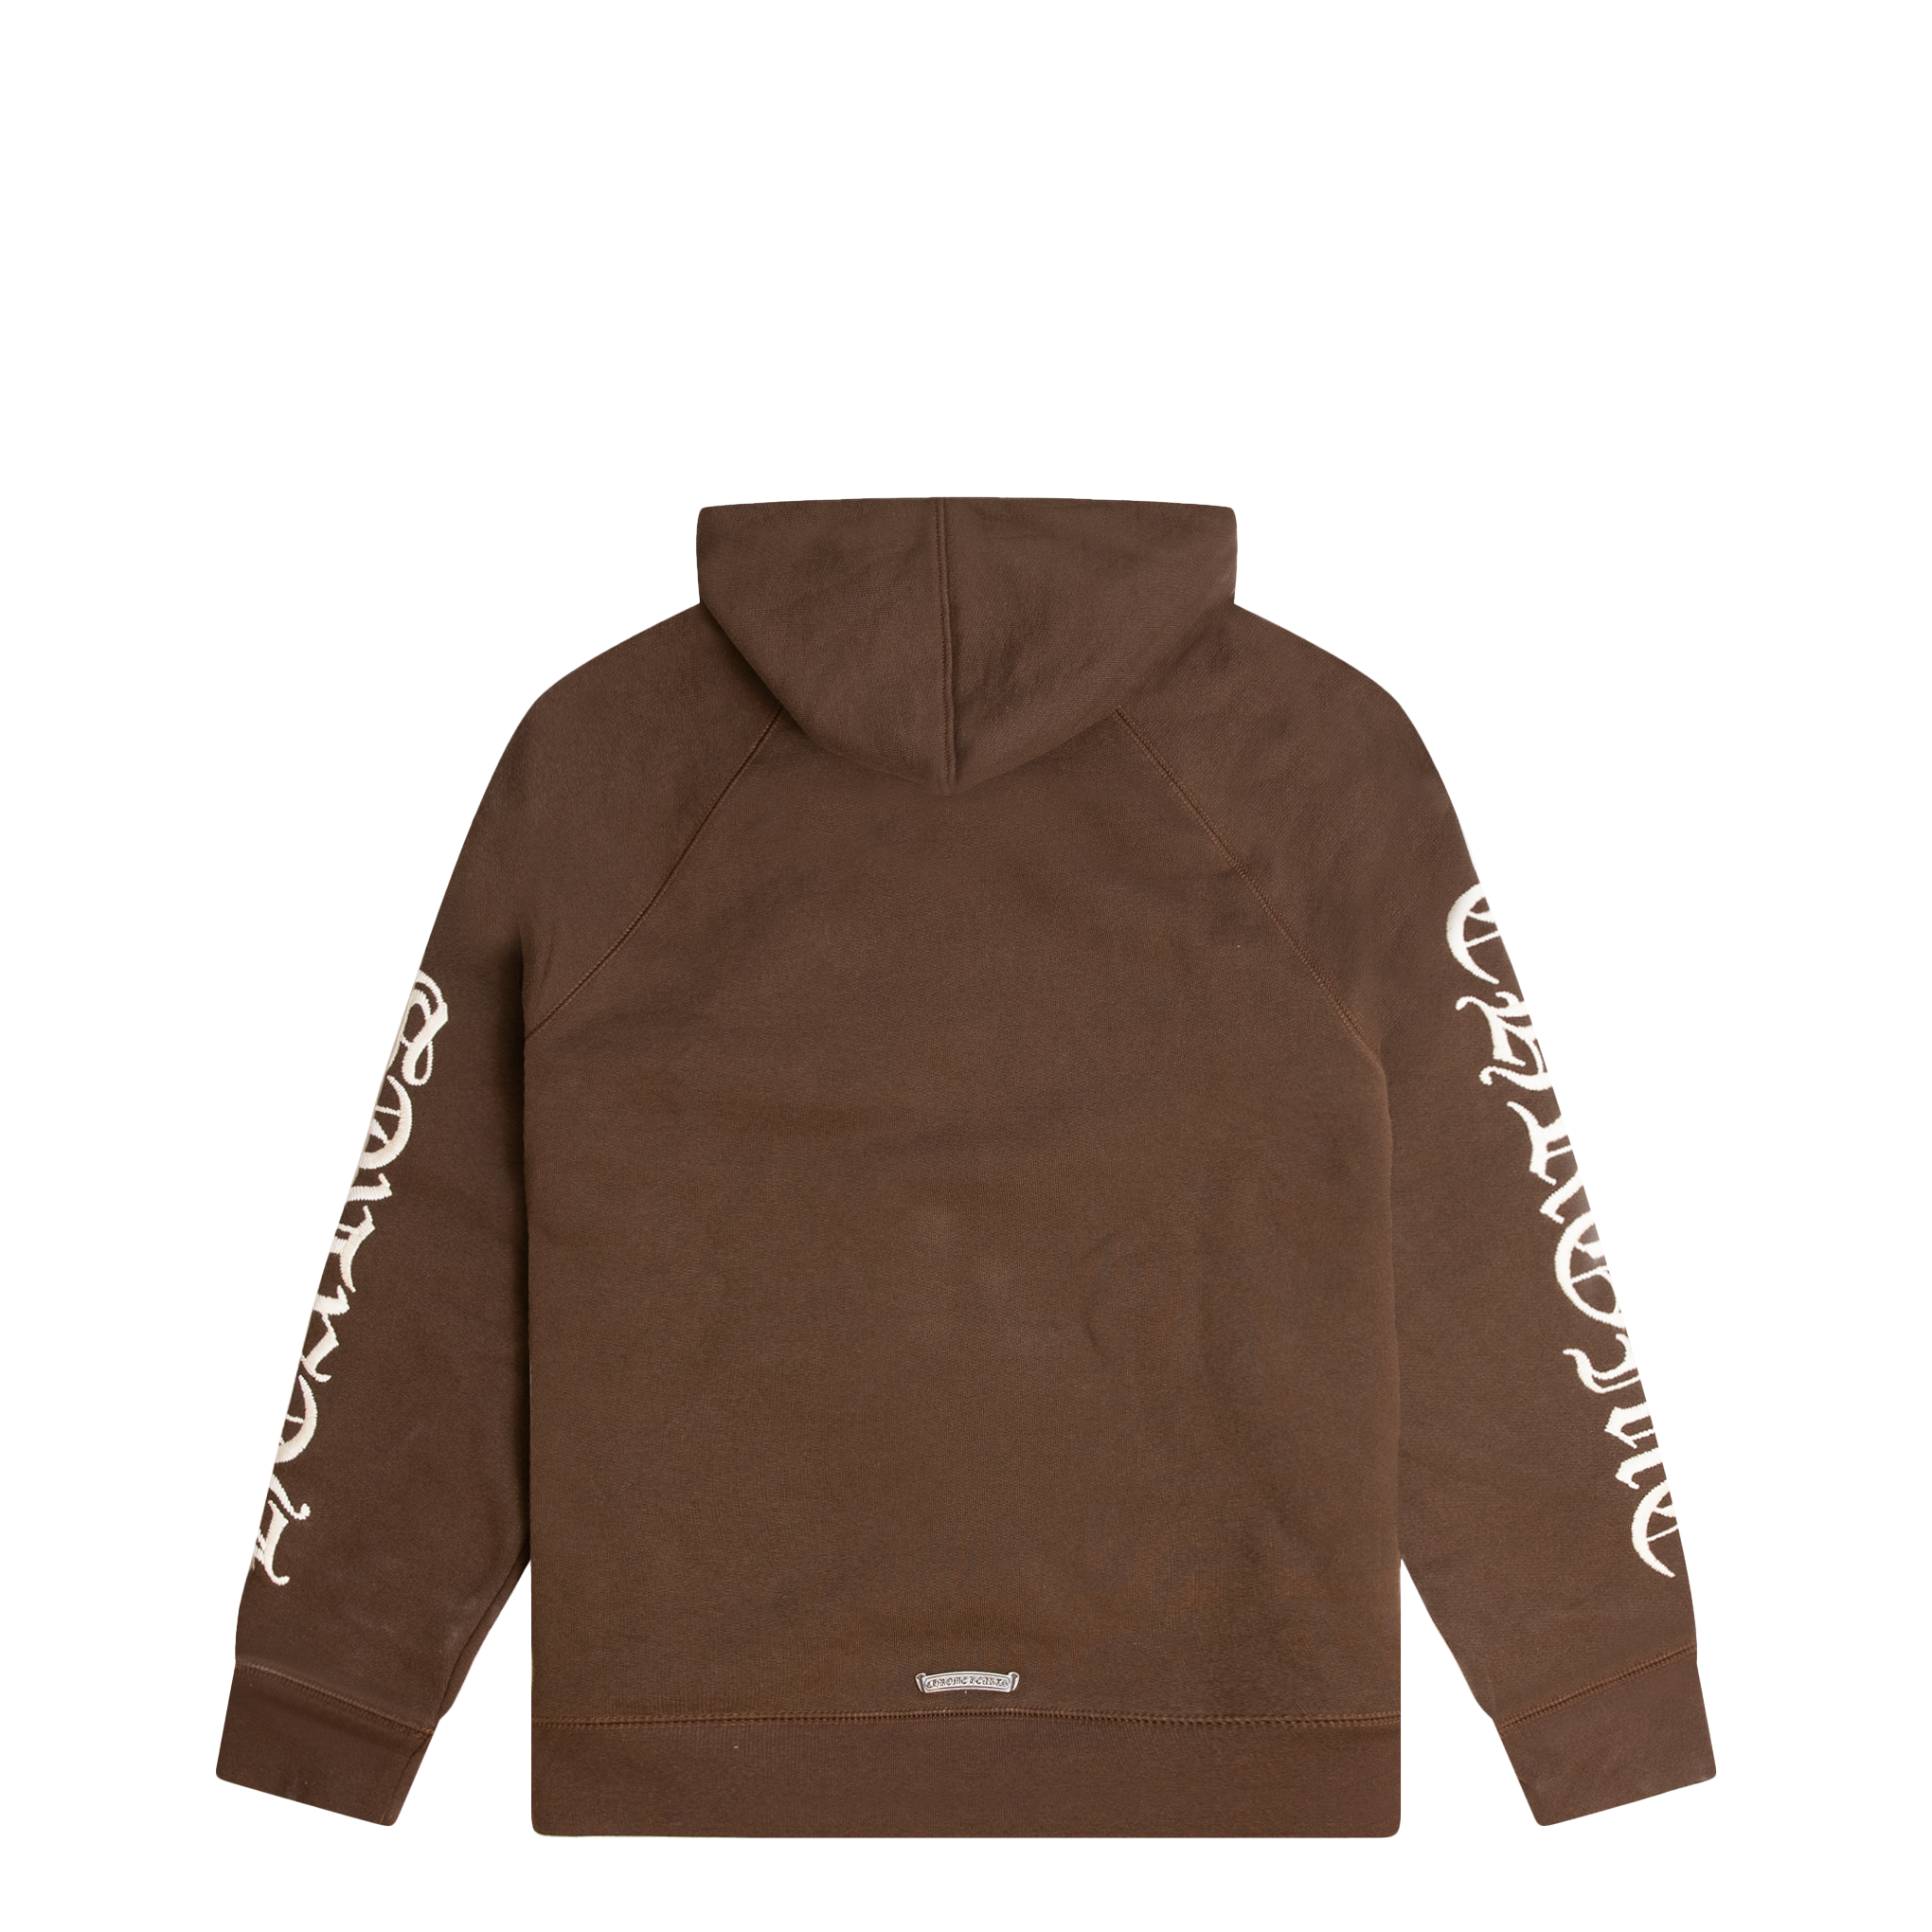 CHROME HEARTS EMBROIDERED HOODIE BROWN